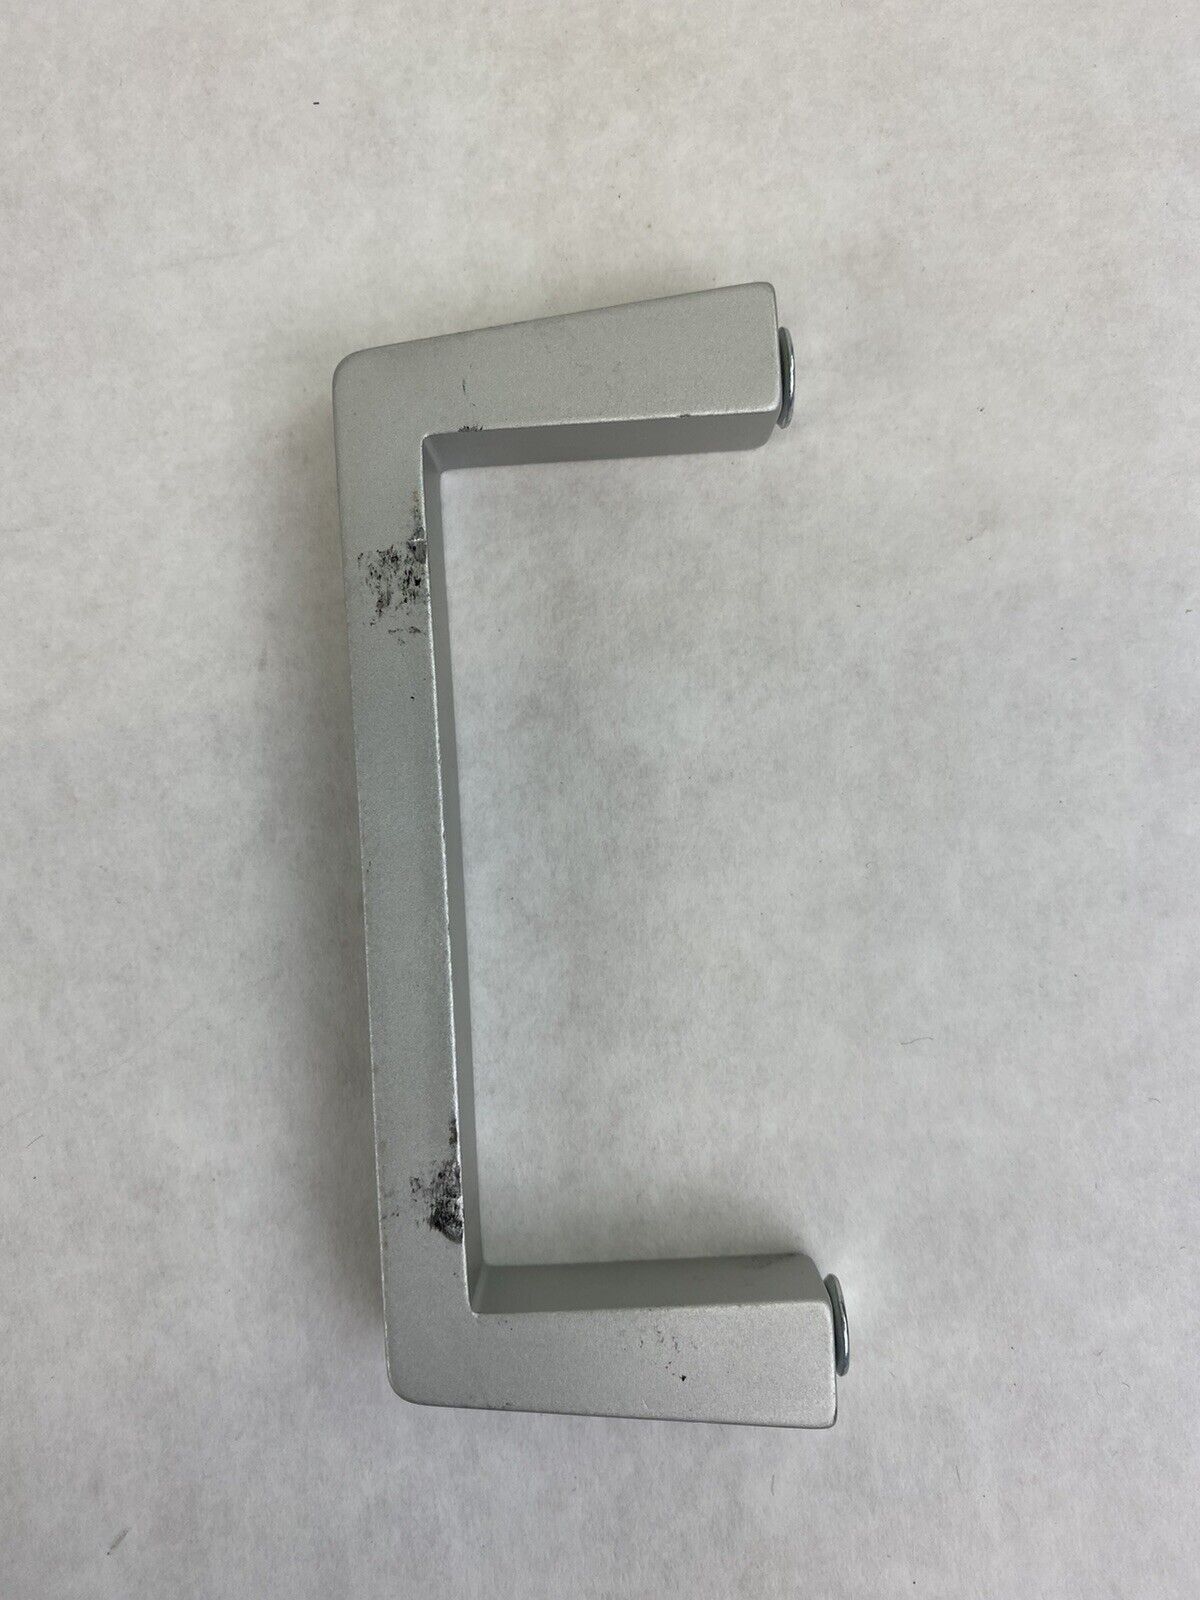 Square Bar pull extruded aluminum modern cabinet handle Lot of 30